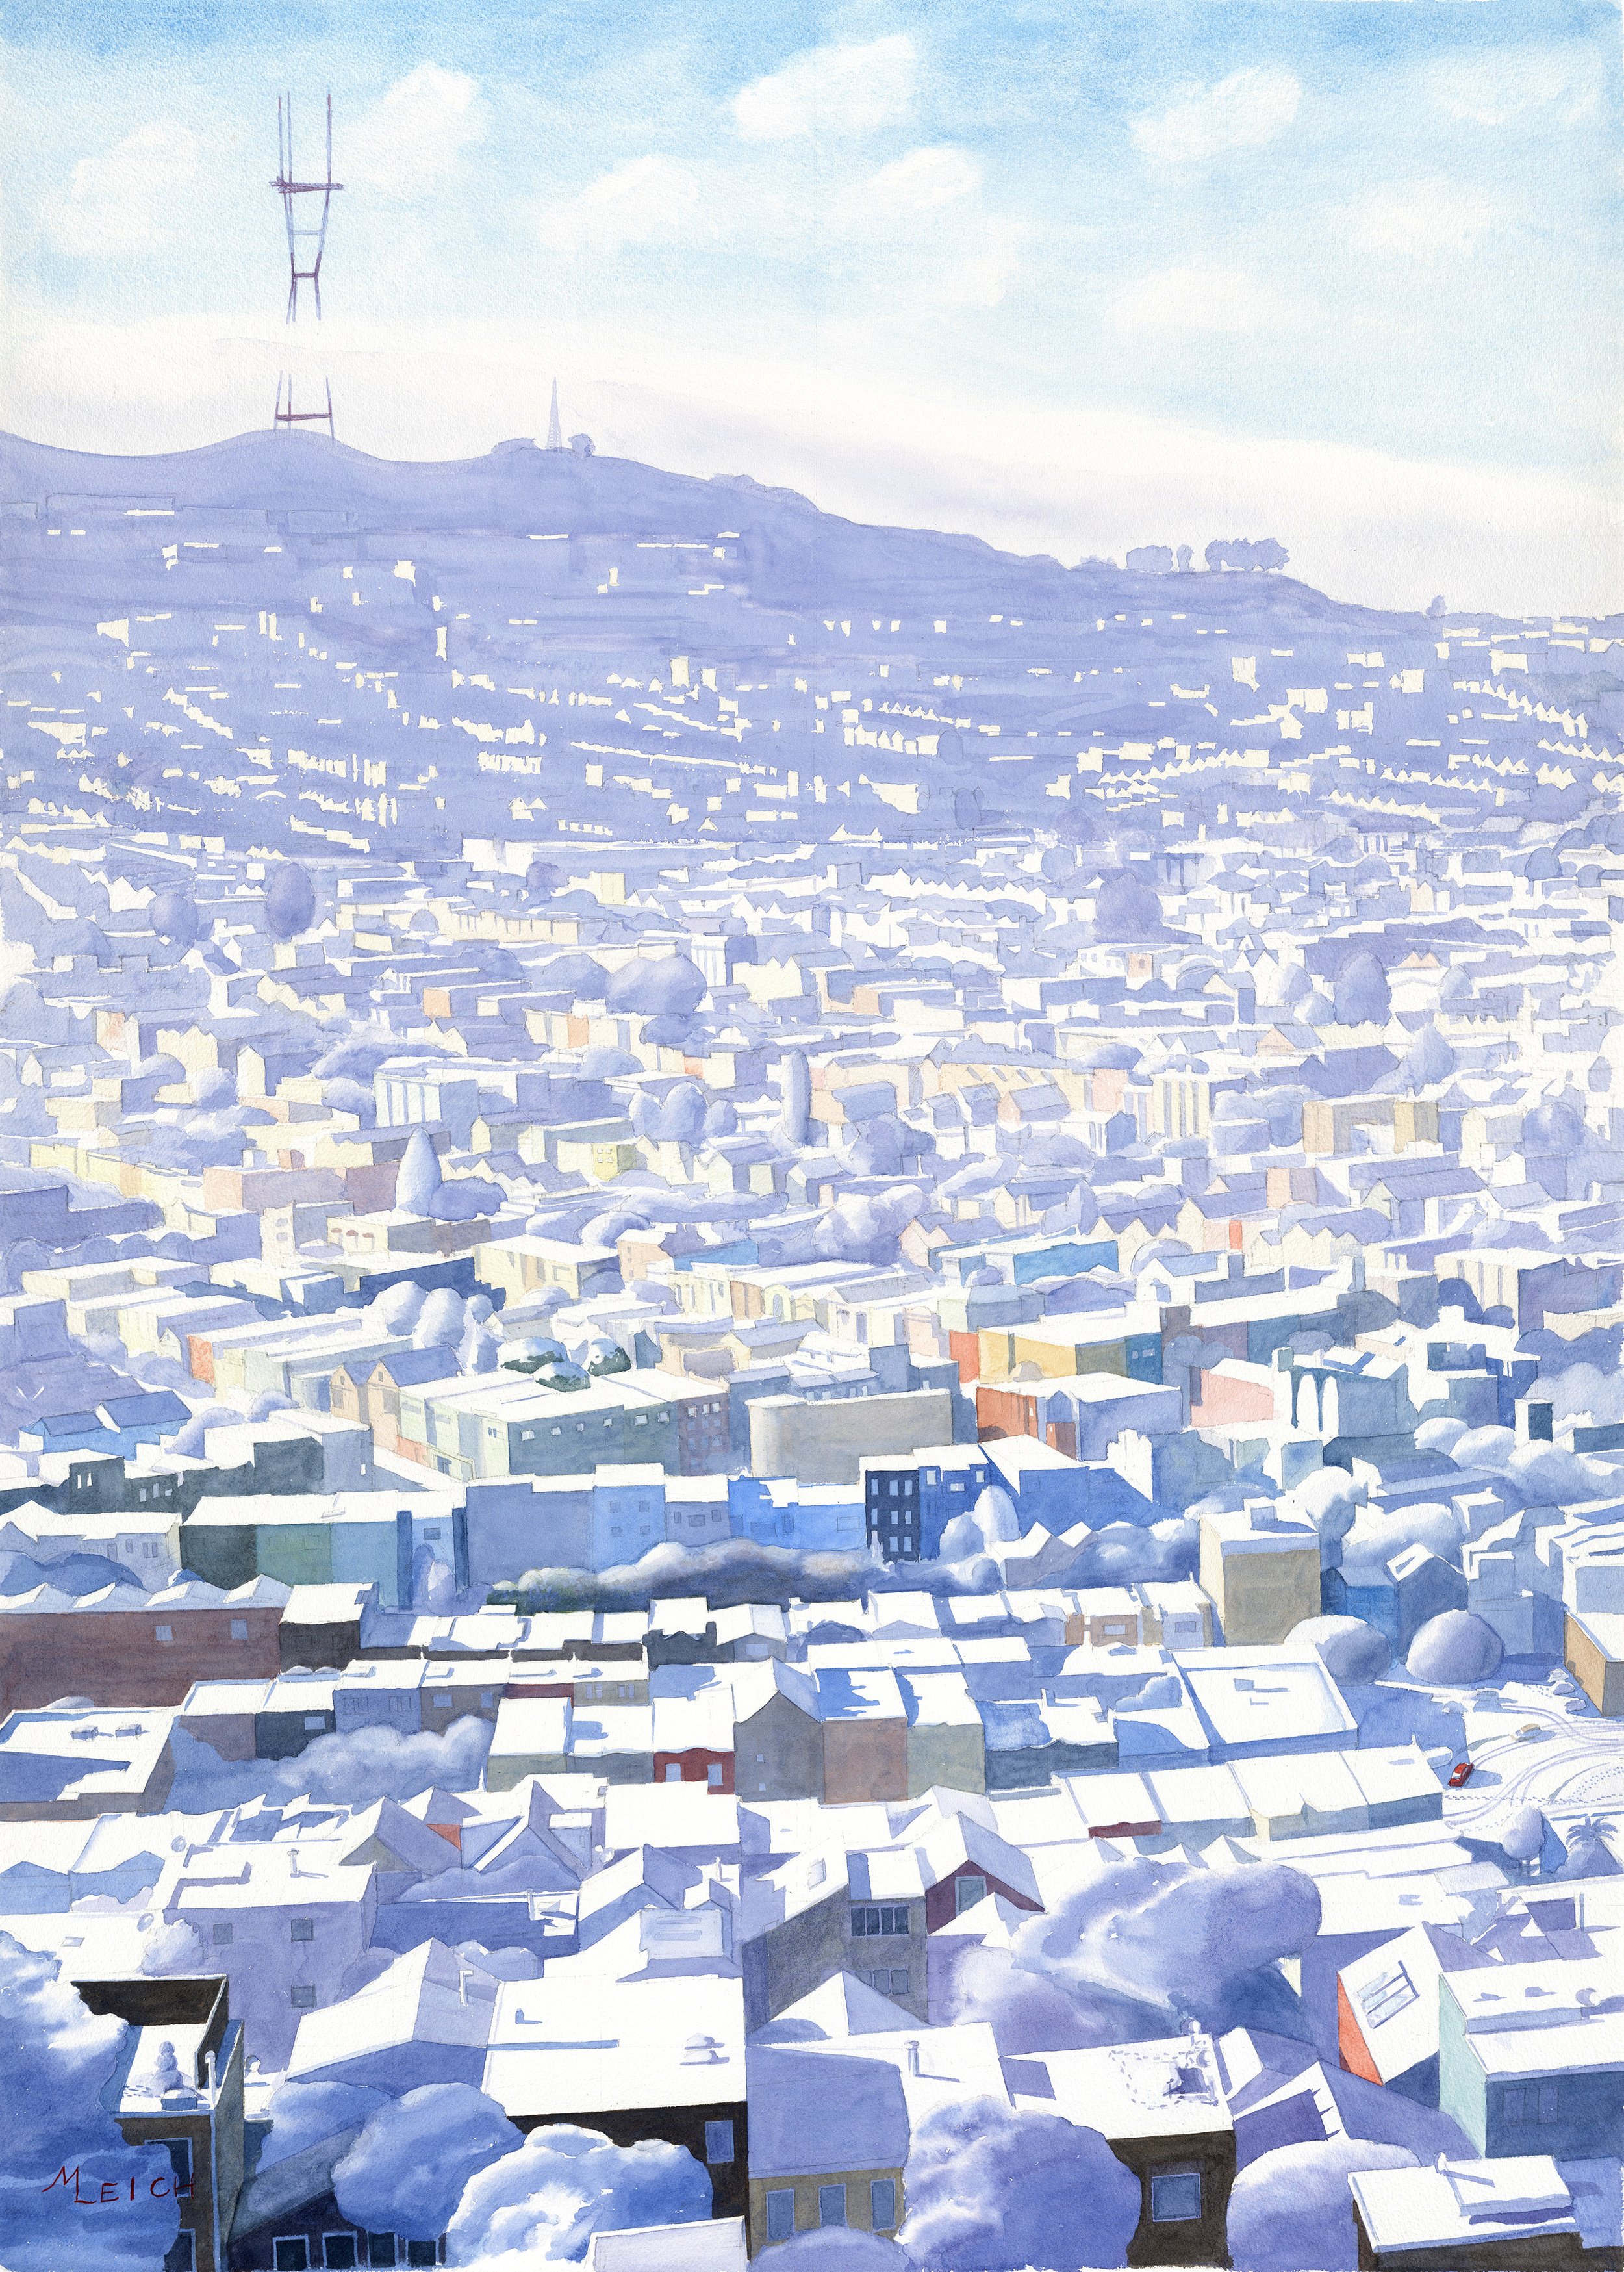 <i>San Francisco in the Snow: Sutro Tower from Bernal Heights</i>, 29 x 41", watercolor on paper, 2022